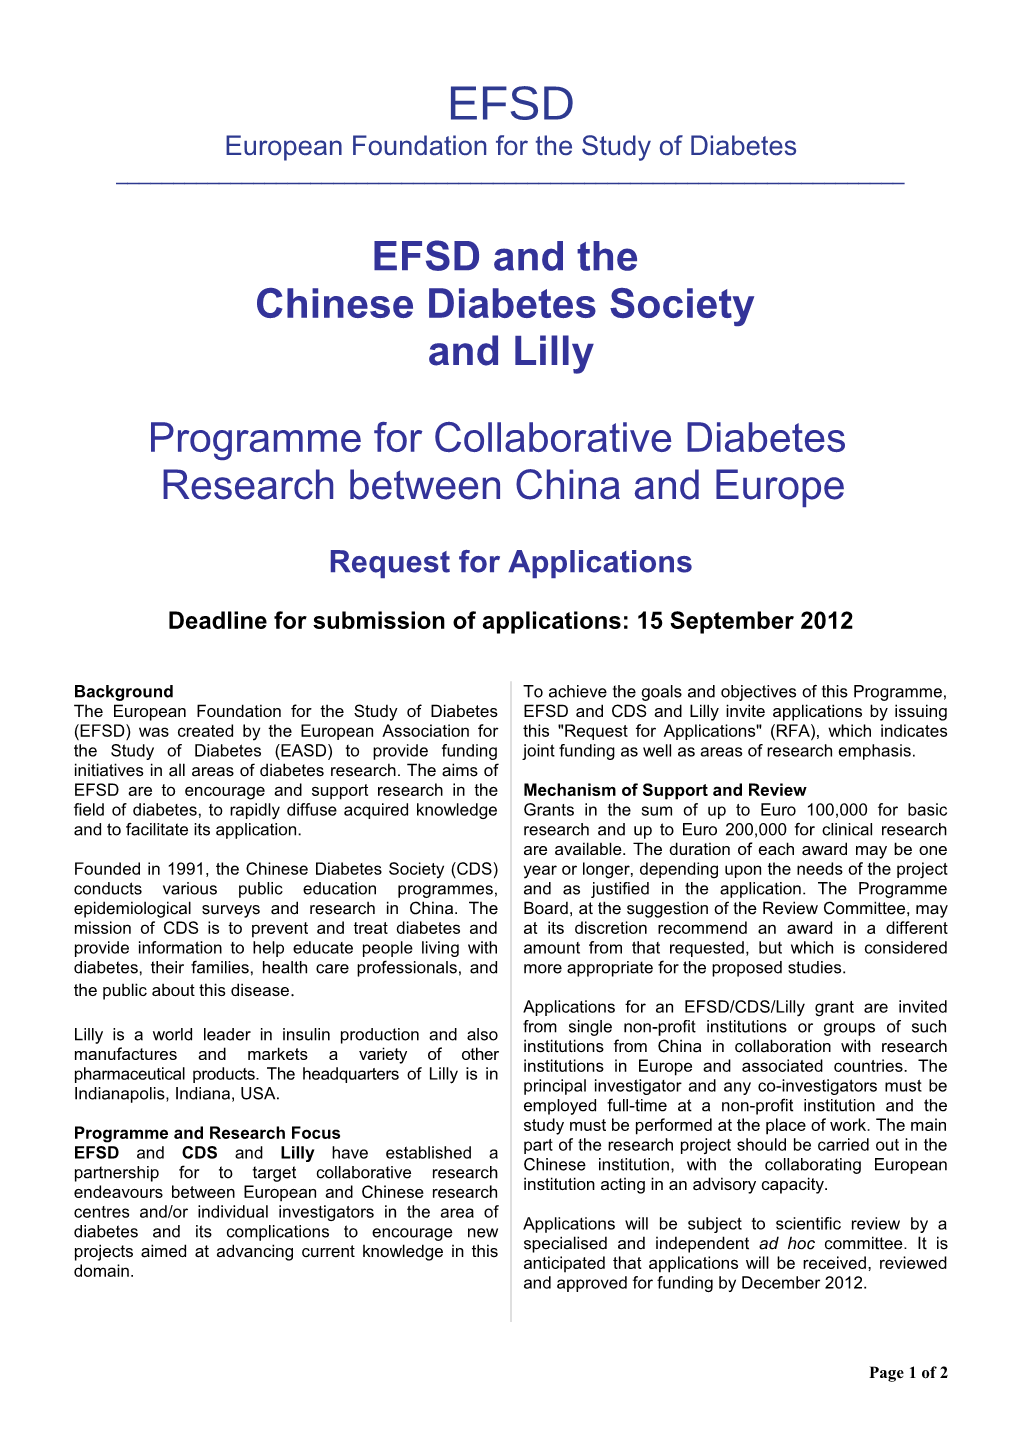 European Foundation for the Study of Diabetes (EFSD)